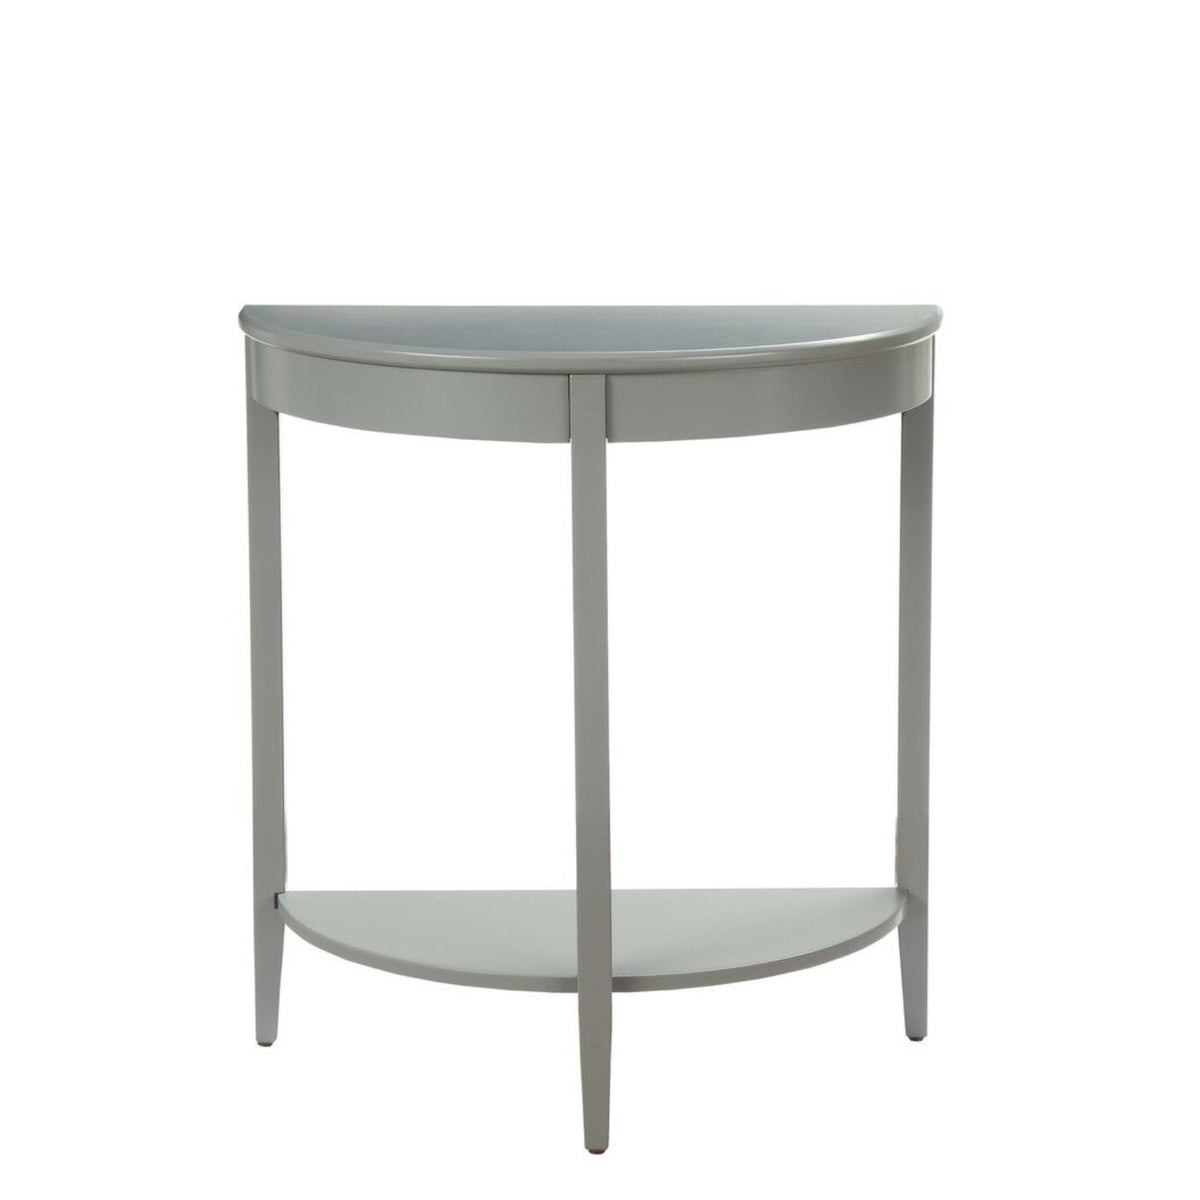 BM191265 - Wooden Half Moon Shaped Console Table with One Open Bottom Shelf, Gray